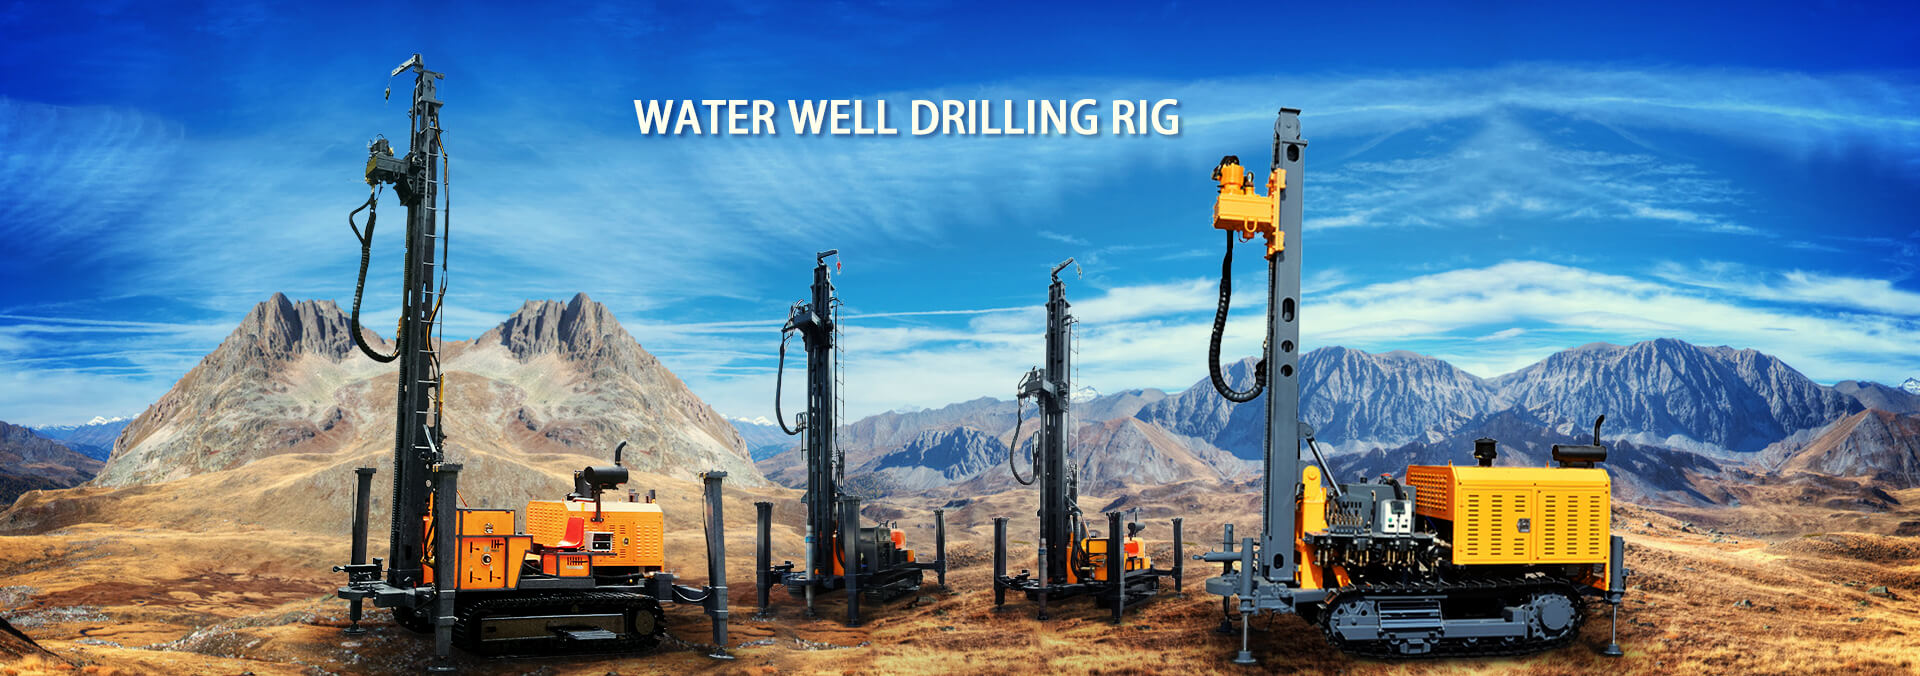 water well drill rig